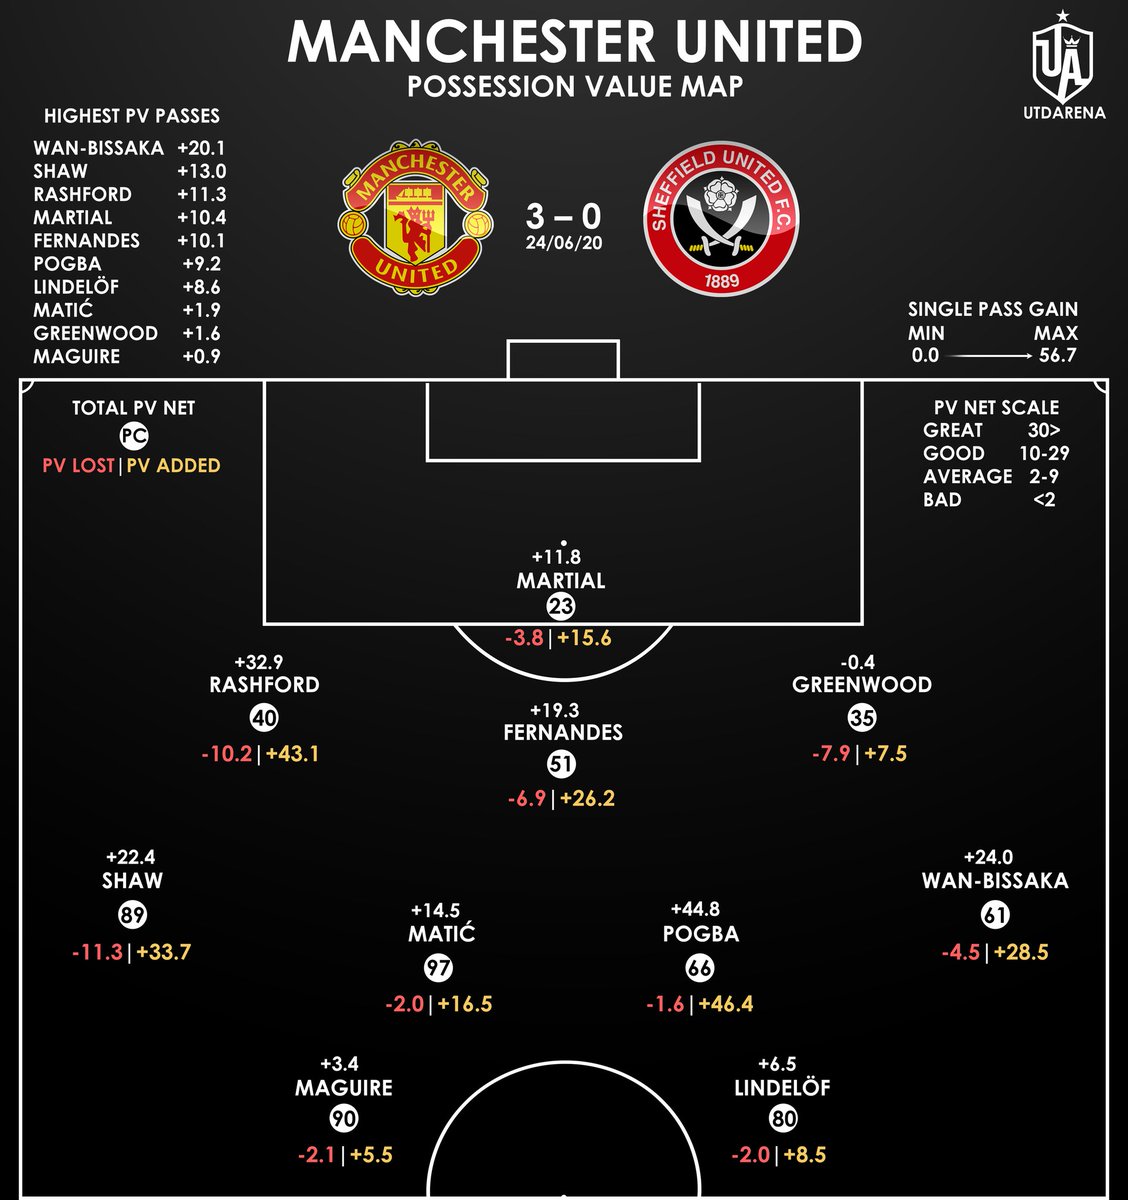 On the top left of the visual we can see the highest PV passes played by each player.Do you remember the first assist from Marcus Rashford to Martial? He added +11.3 PV due to where he was and where the ball ended up. It was a very dangerous pass and it resulted in a goal.